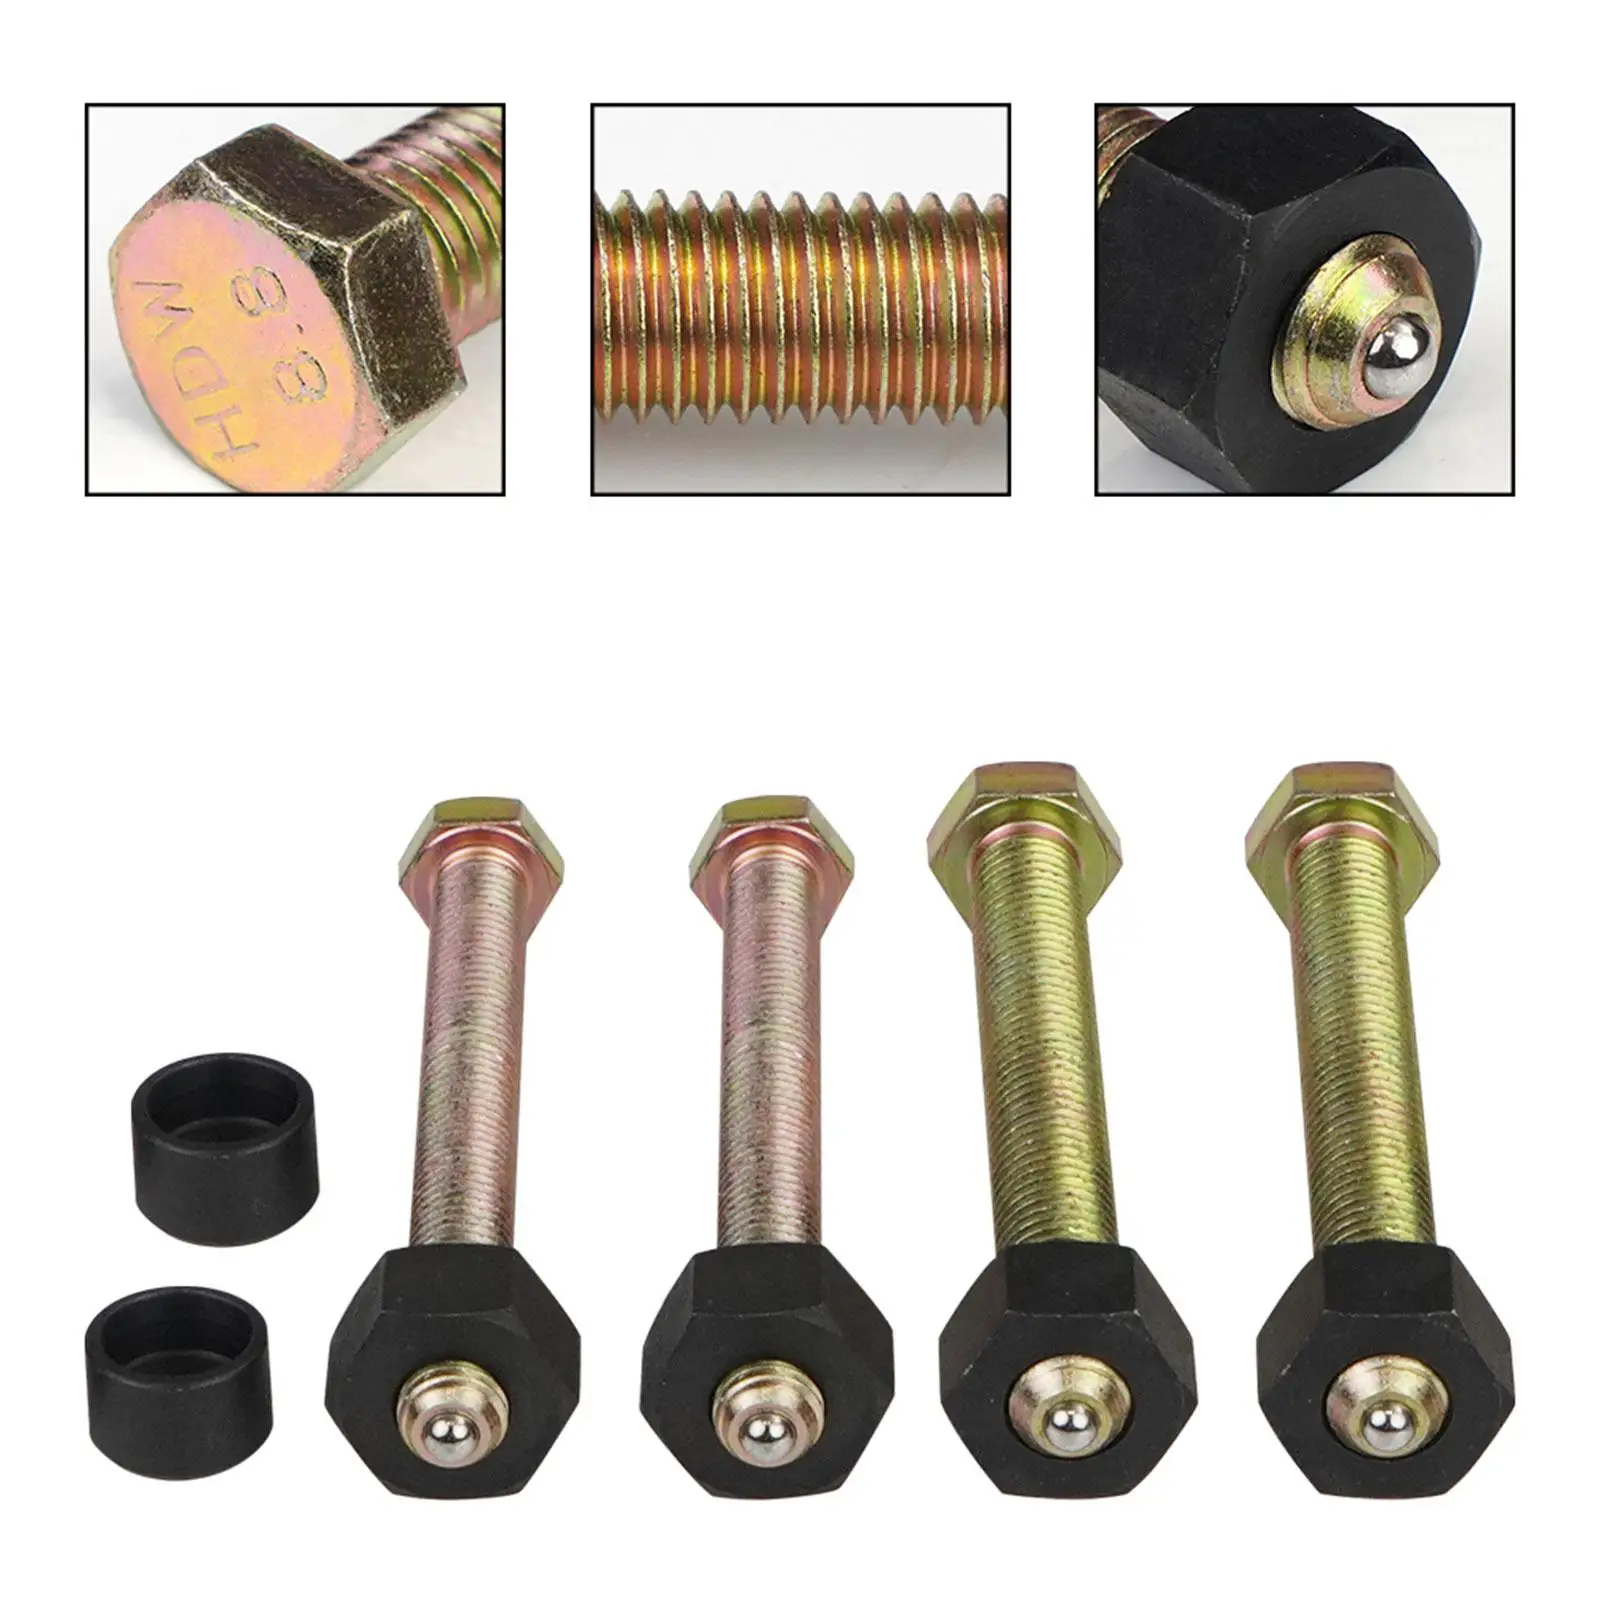 Impact Rated Hub Removal Bolt Set 78834 Professional Assembly Replaces 3/4 inch 15/16 inch Threaded Rod Wheel Hub Removal Tool